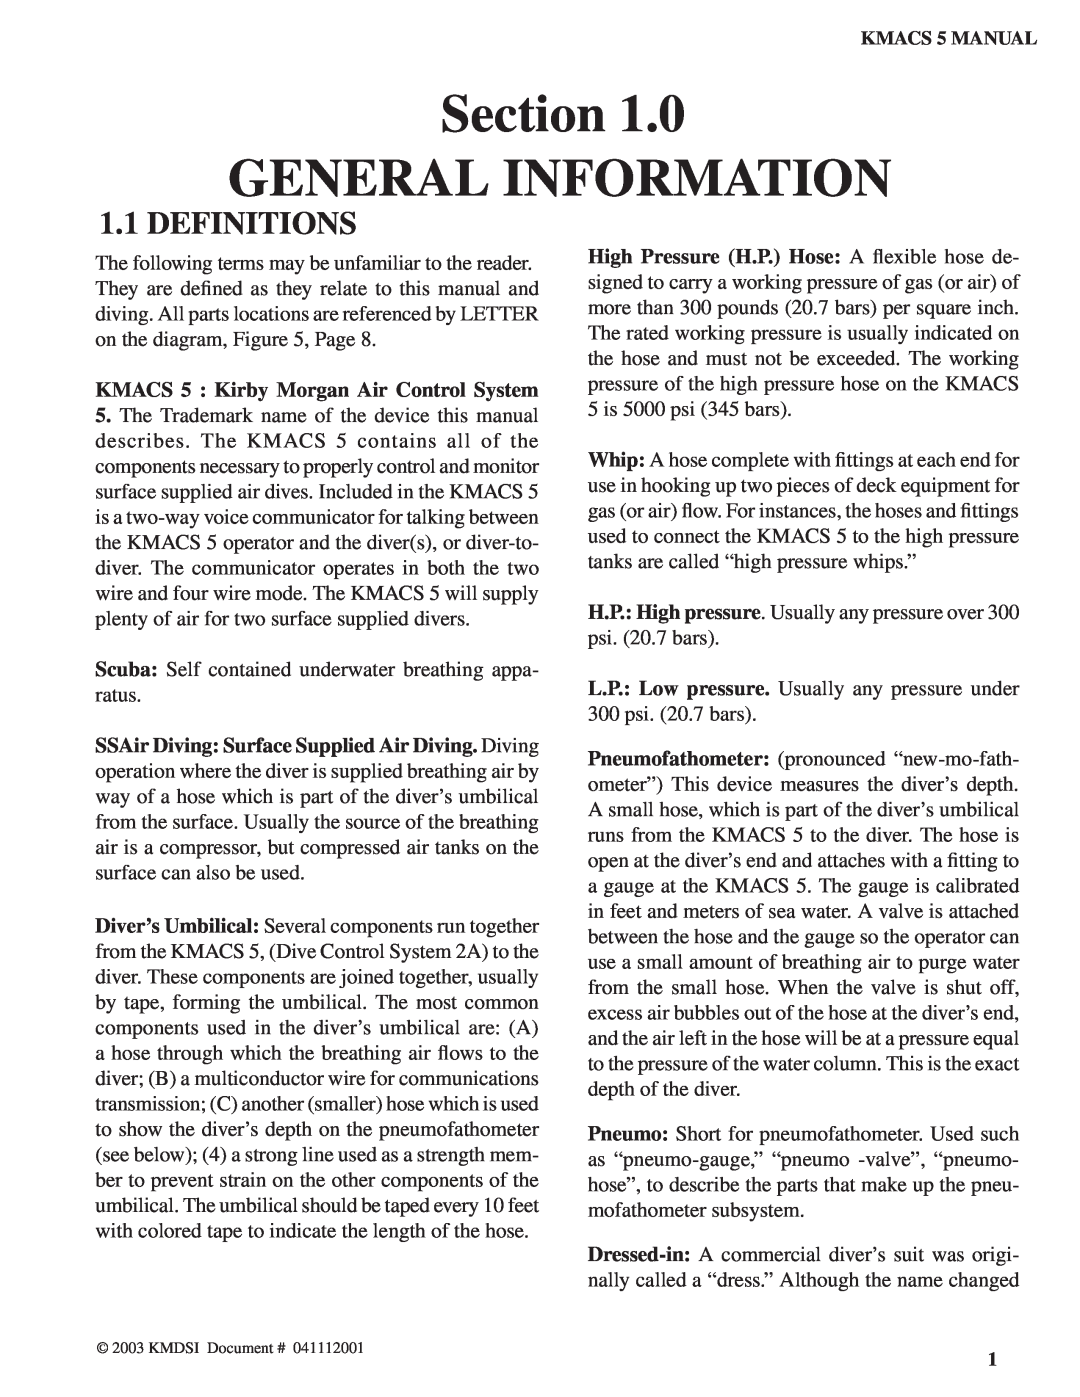 Kirby manual Section GENERAL INFORMATION, Definitions, KMACS 5 Kirby Morgan Air Control System 